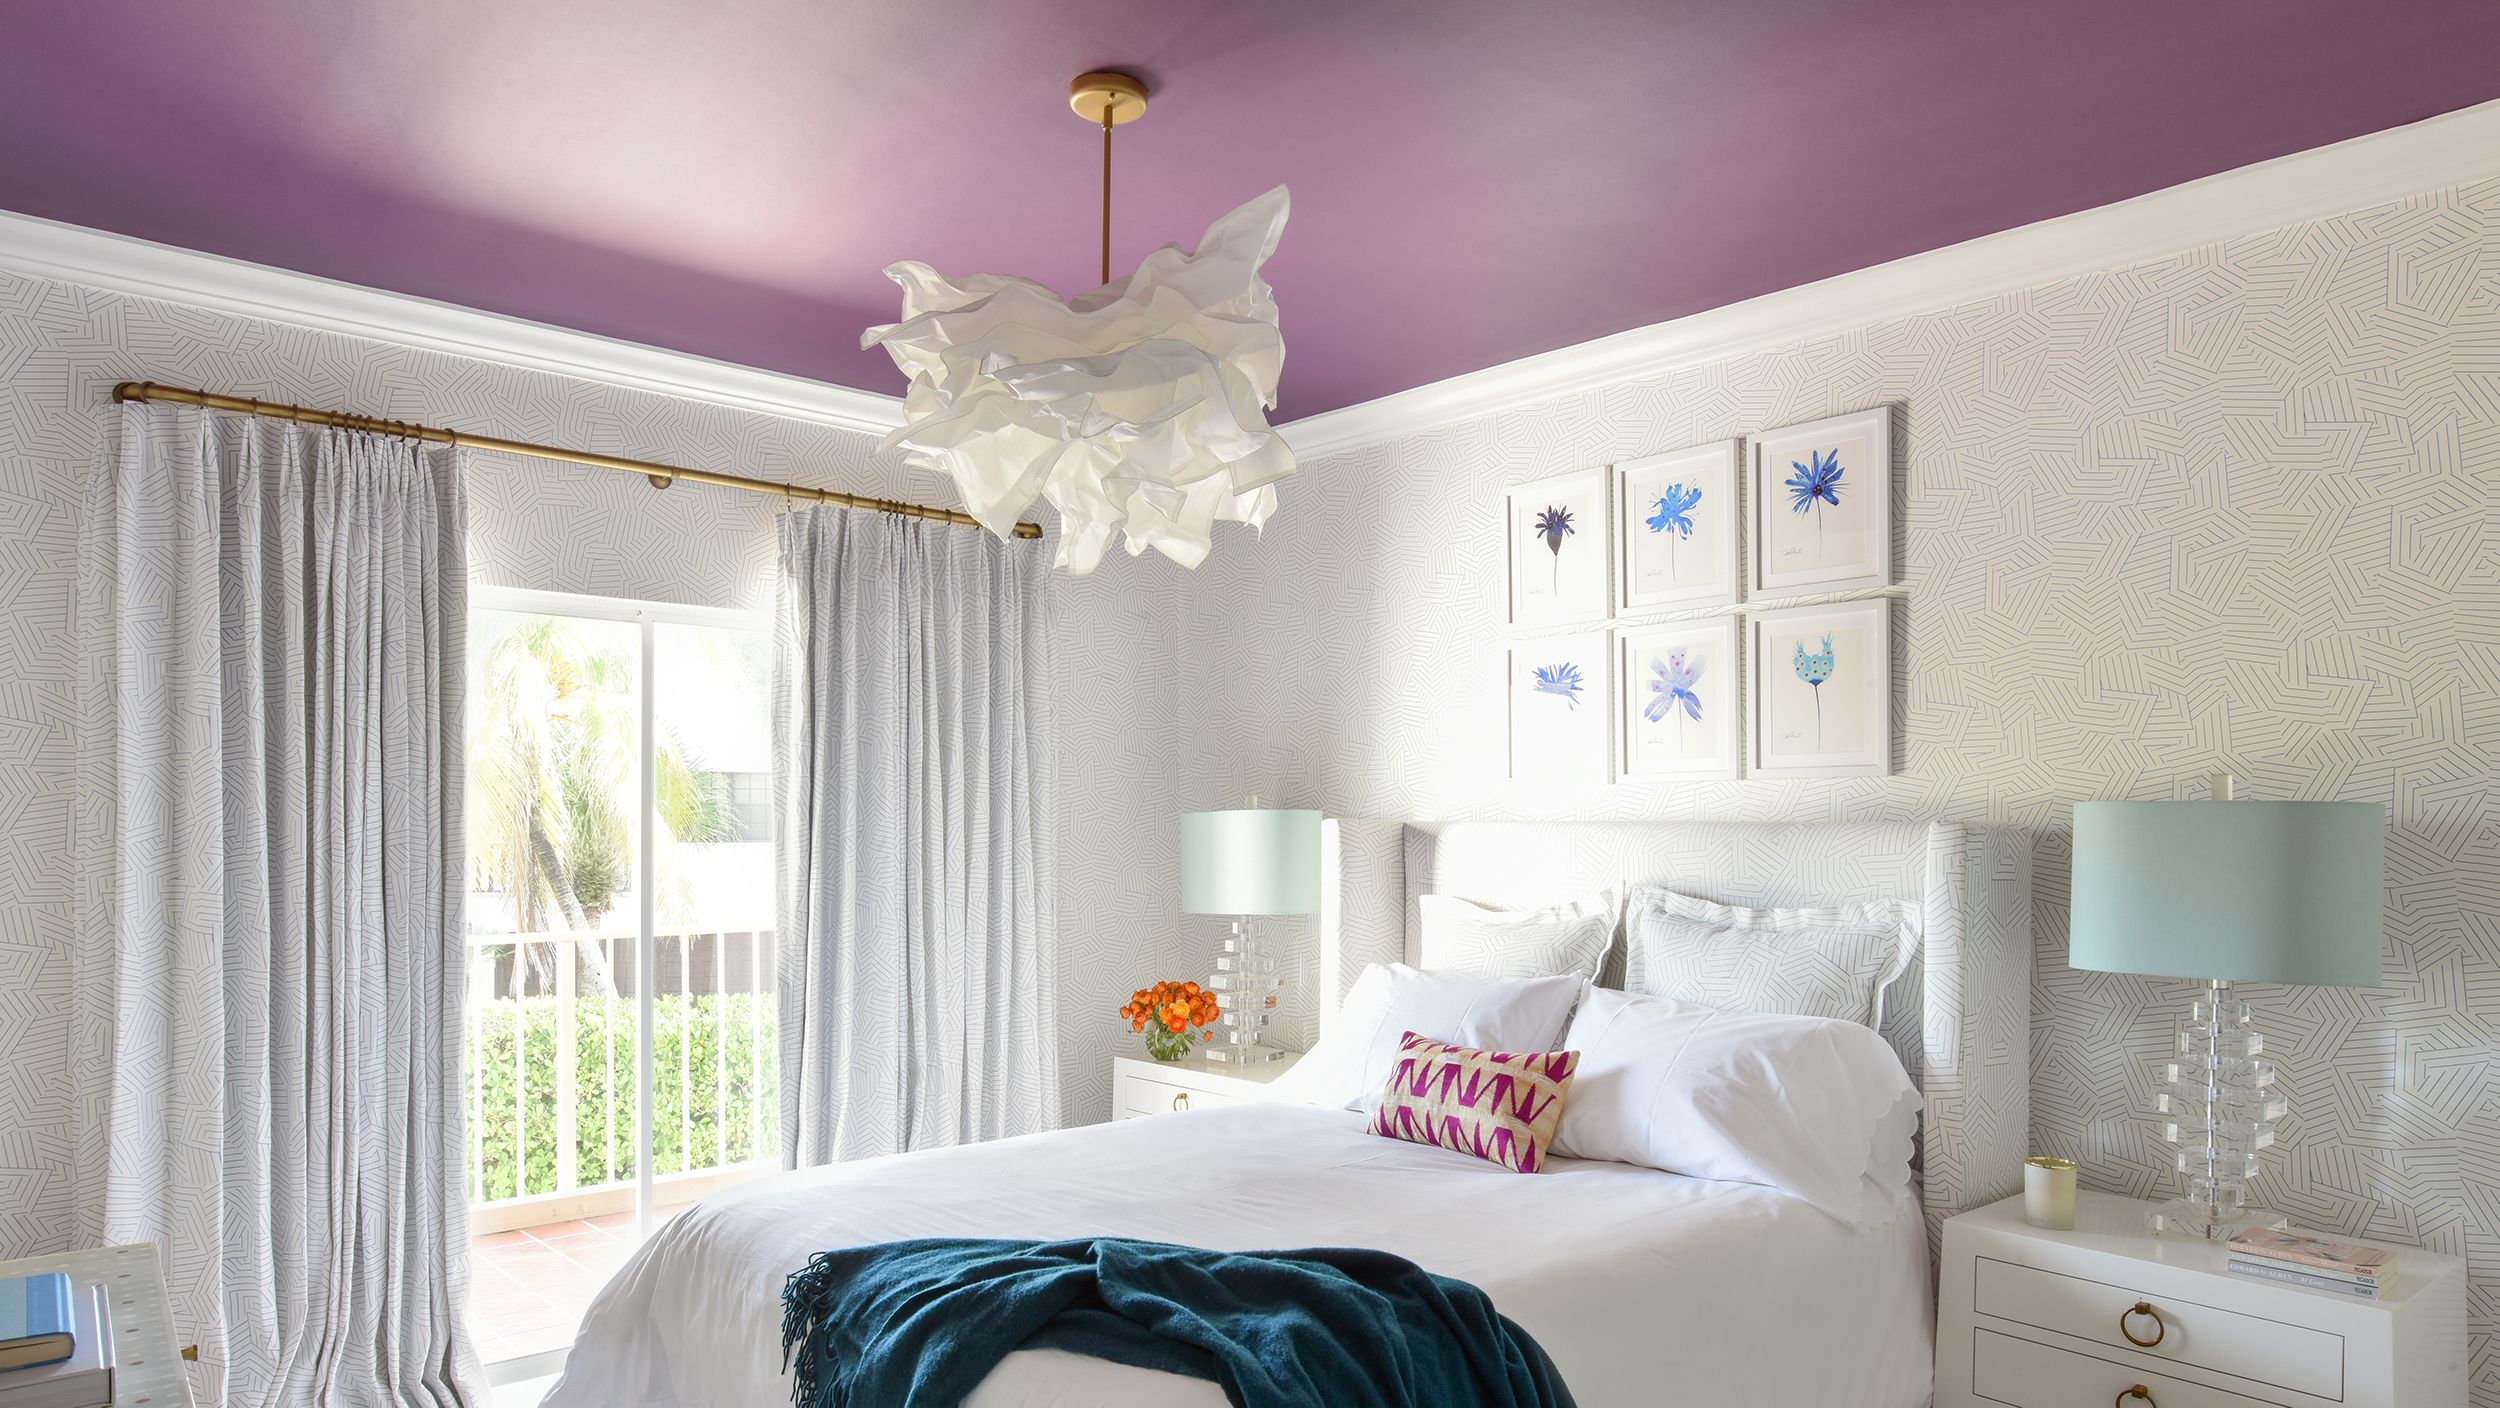 Home decor essentials for Pantone Color of the Year